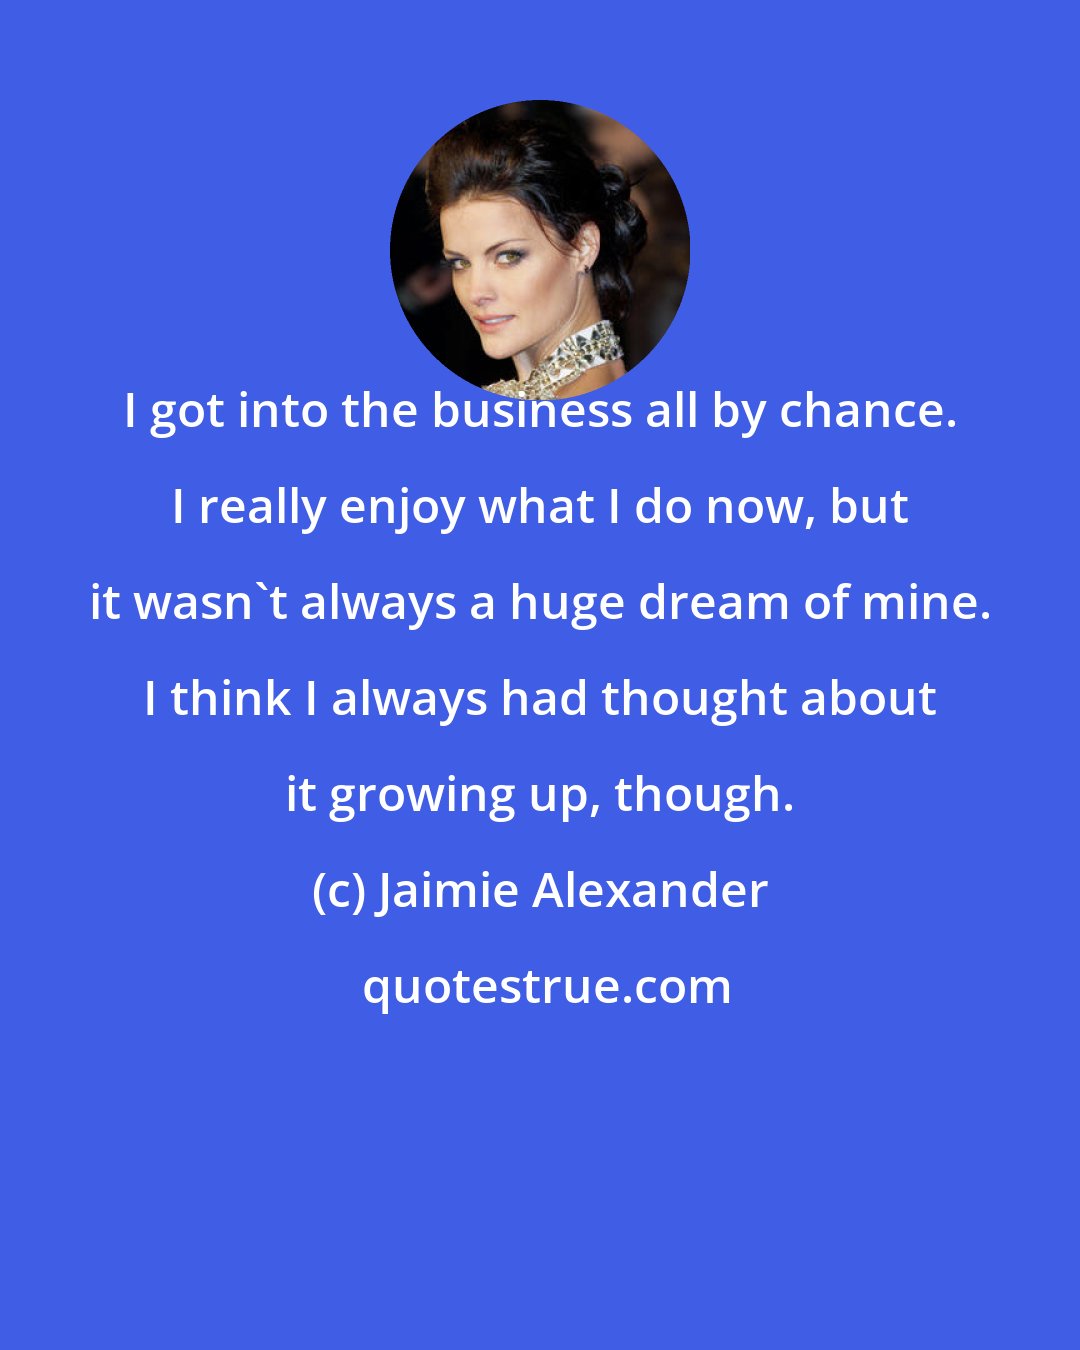 Jaimie Alexander: I got into the business all by chance. I really enjoy what I do now, but it wasn't always a huge dream of mine. I think I always had thought about it growing up, though.